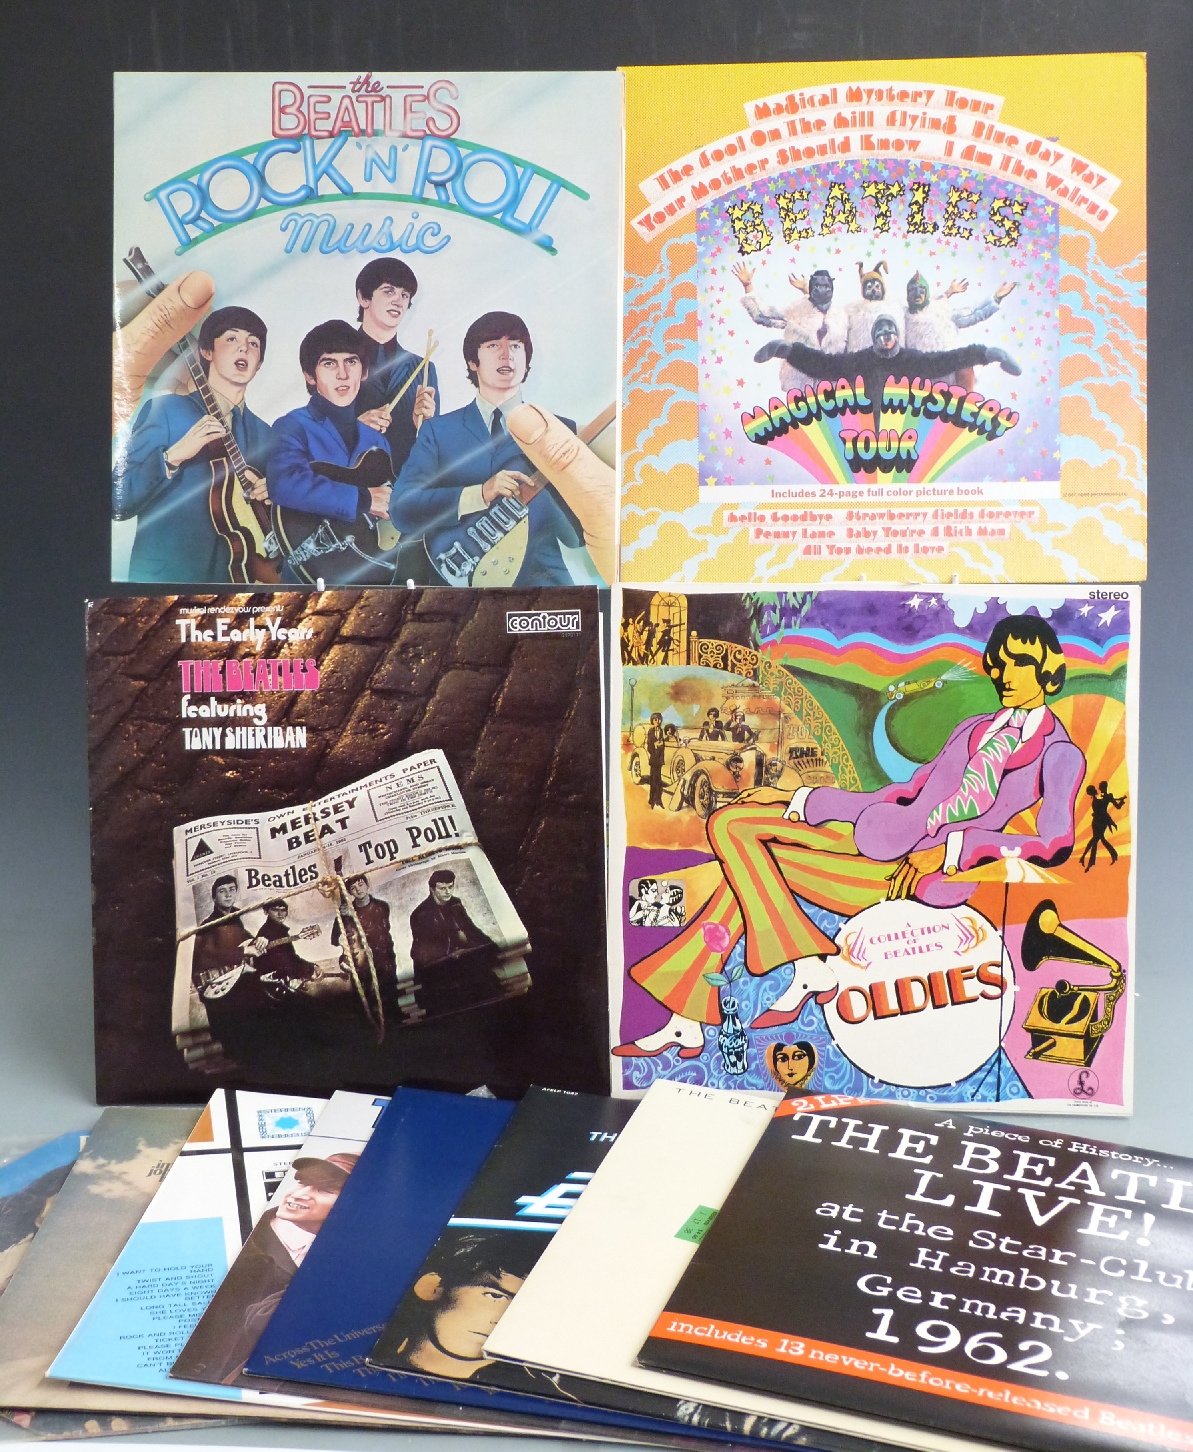 The Beatles - Rock n' Roll Music, Magical Mystery Tour, The Early Years, Oldies, Star Club,